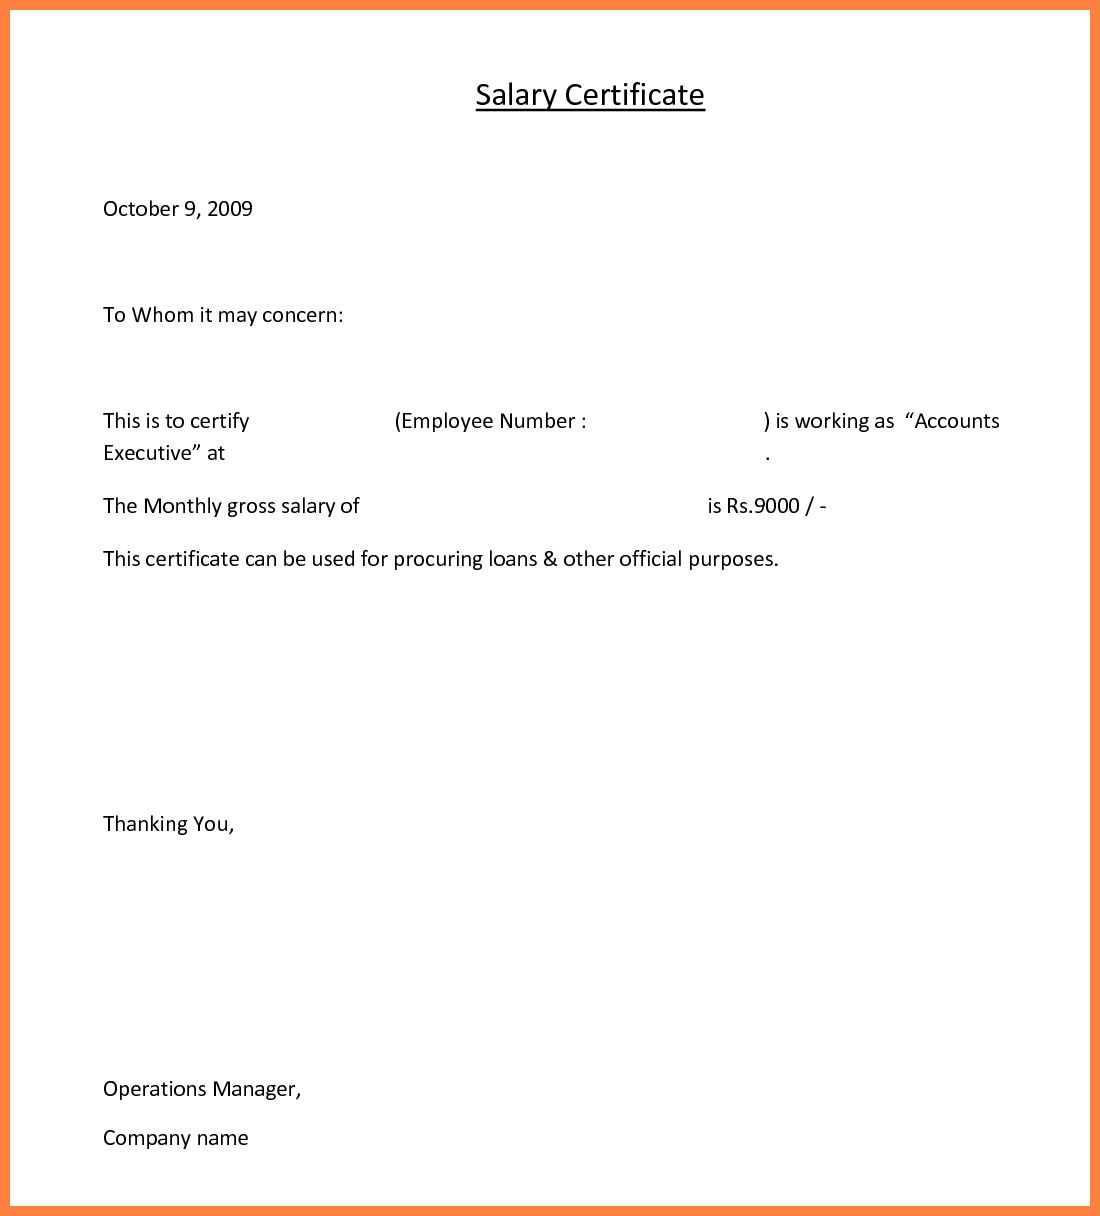 ❤️ Free Printable Certificate Of Employment Form Sample For Employee Certificate Of Service Template